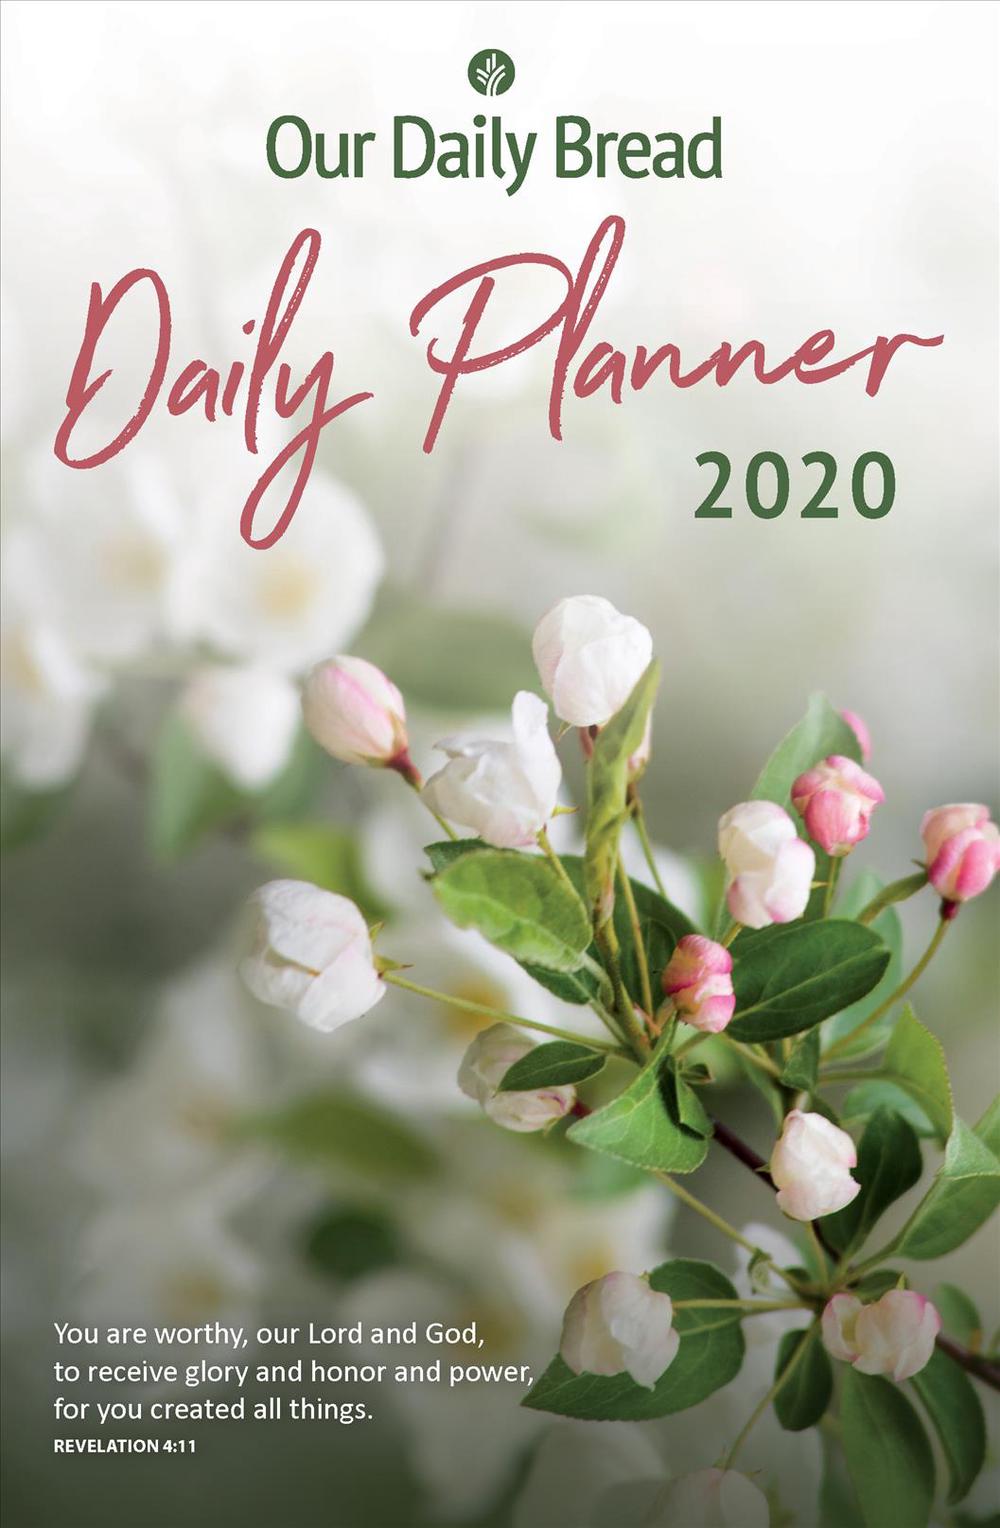 Our Daily Bread Daily Planner 2020 by Our Daily Bread Ministries